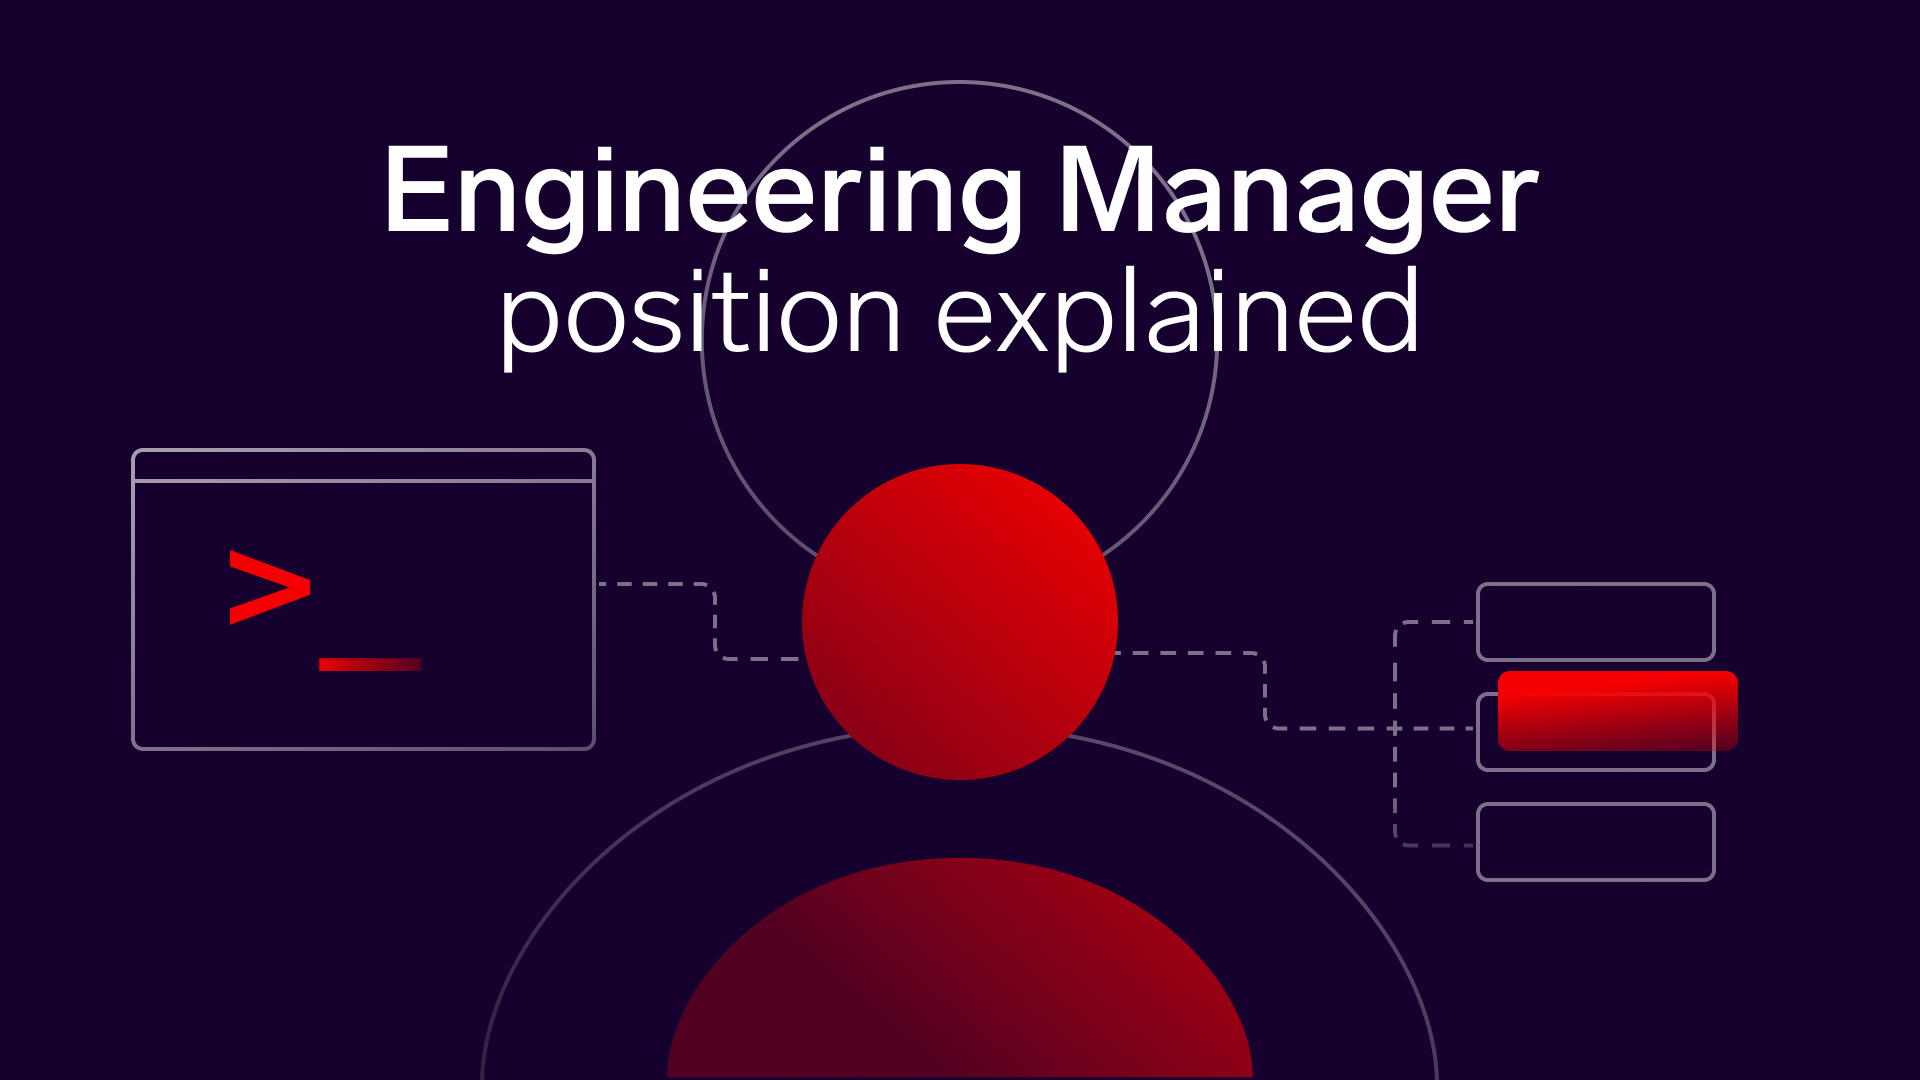 Engineering Manager position explained